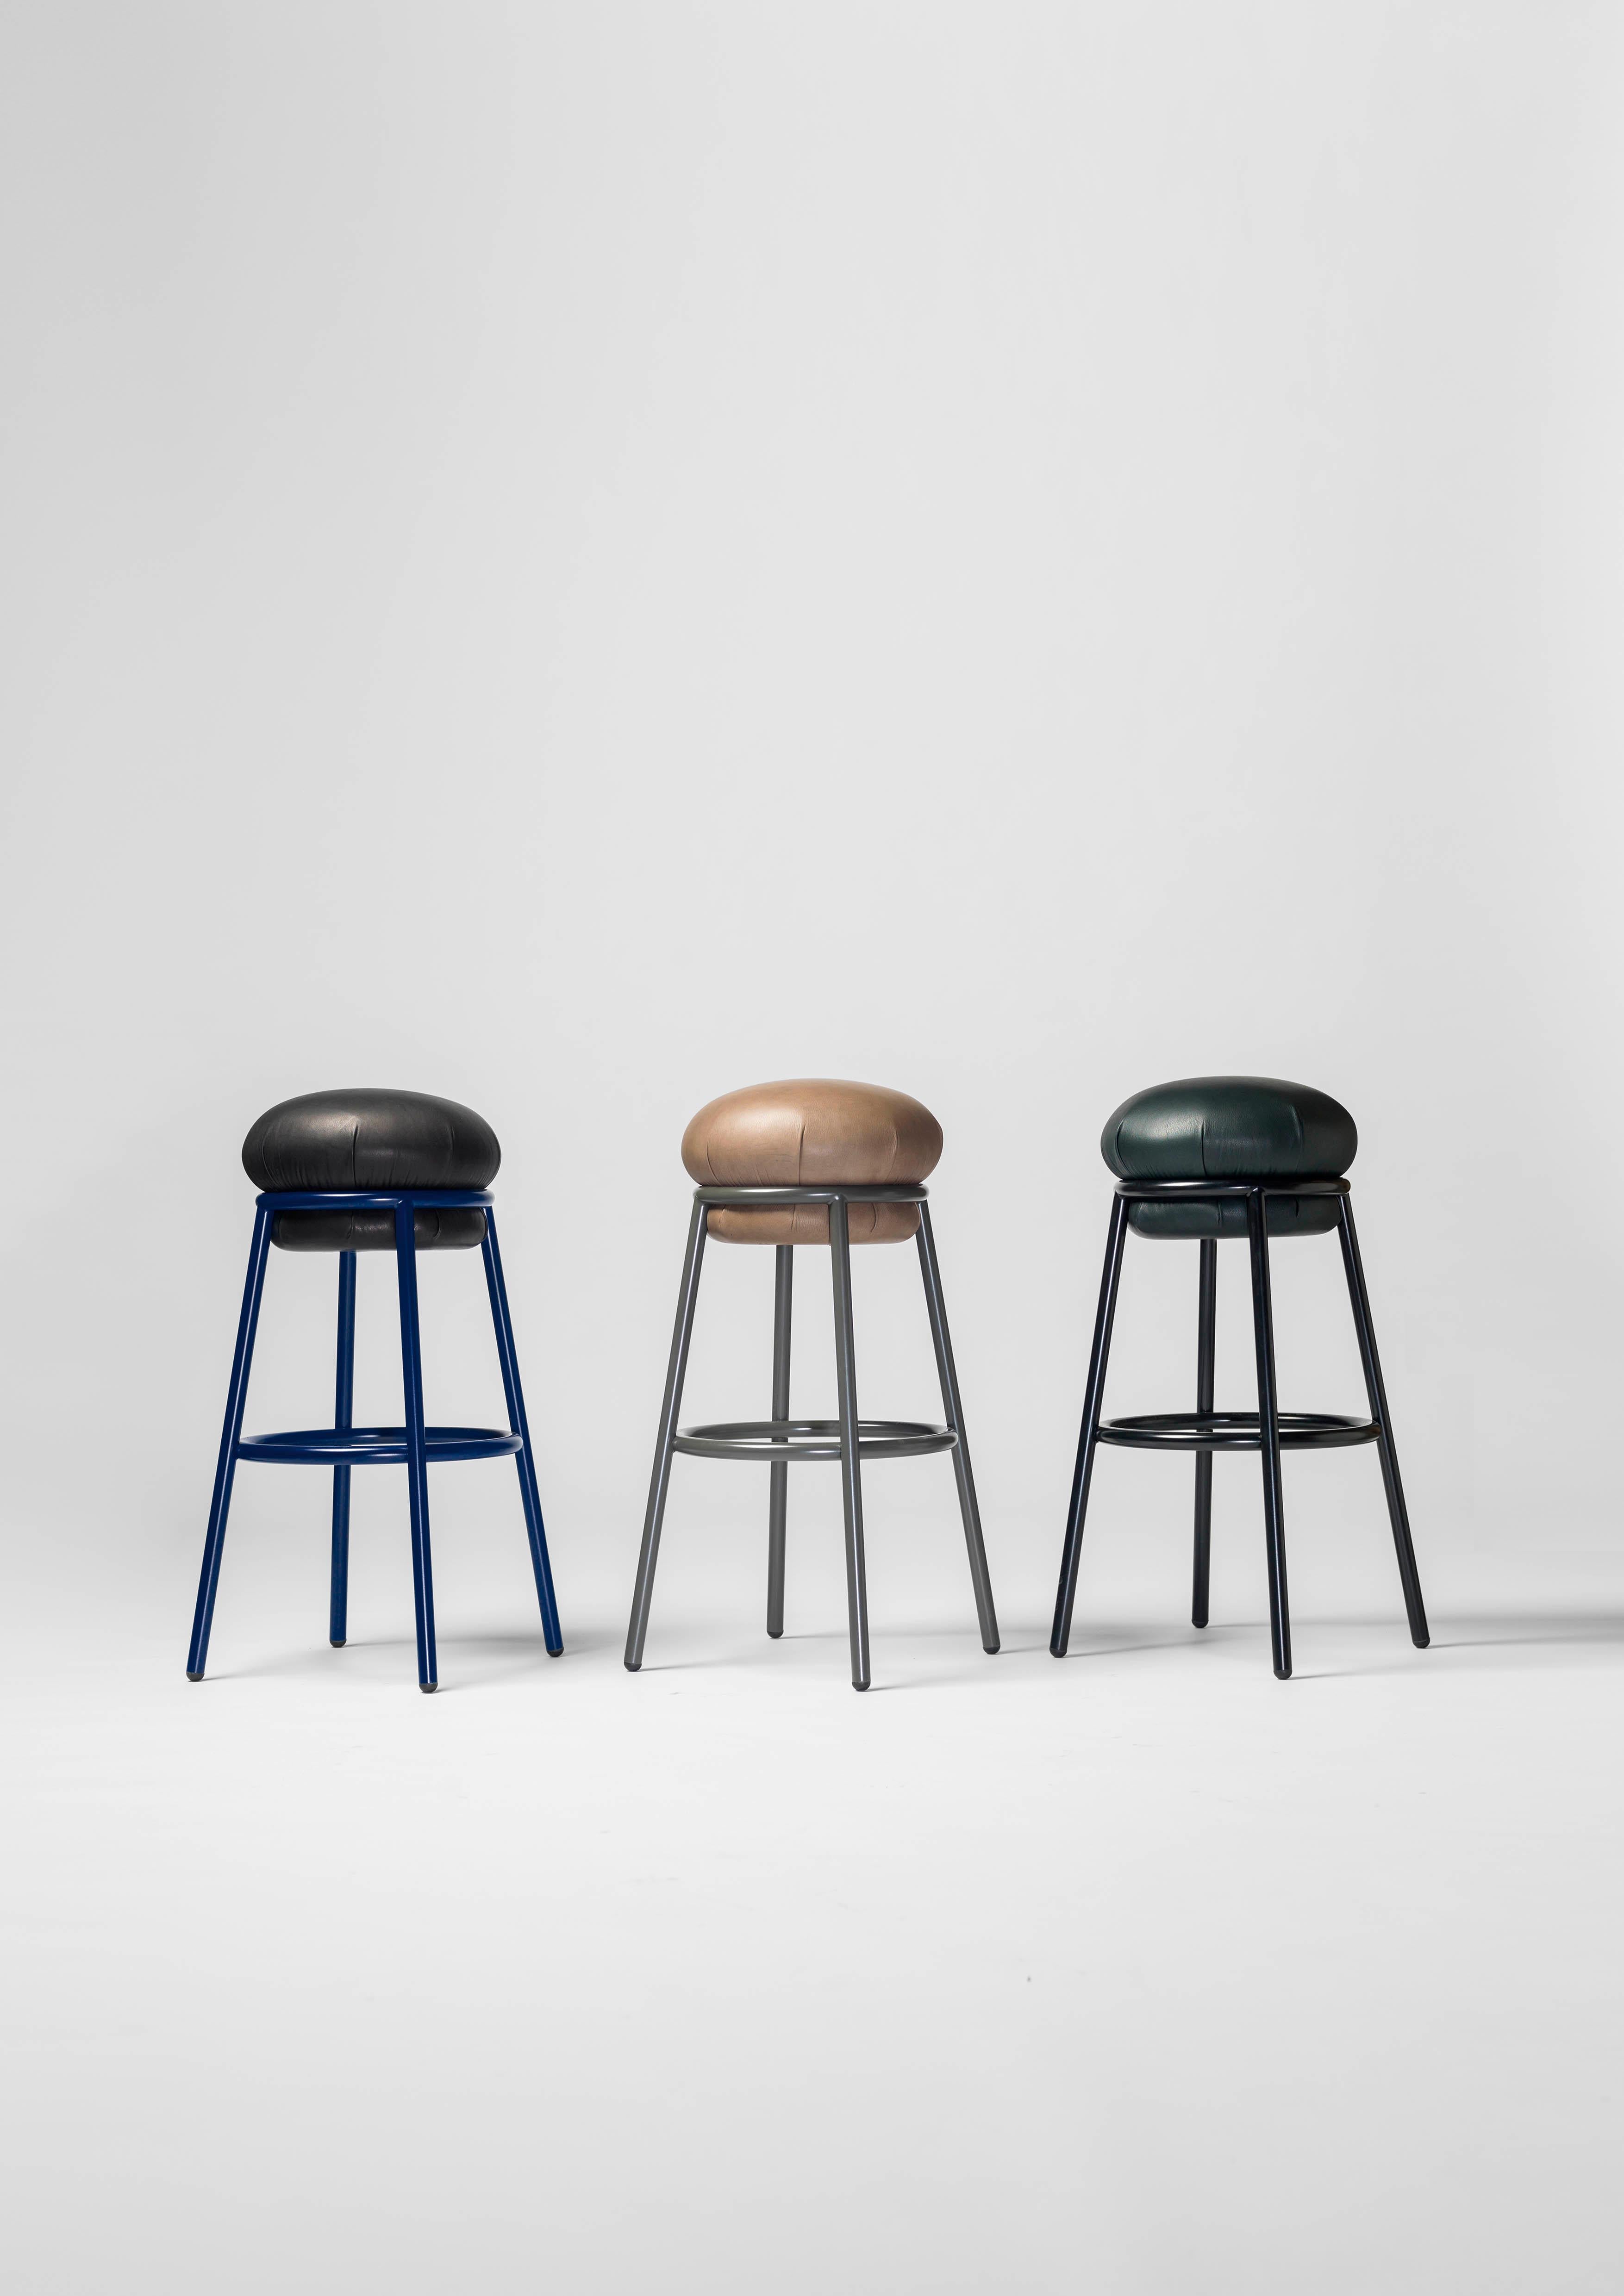 “Grasso is not fat. Grasso is more than fat. It’s overflowing.” This is how Stephen Burks, designer of Grasso collection, sums up his new collection for BD.

The stool perfectly complements the armchair and is made in the same structure and